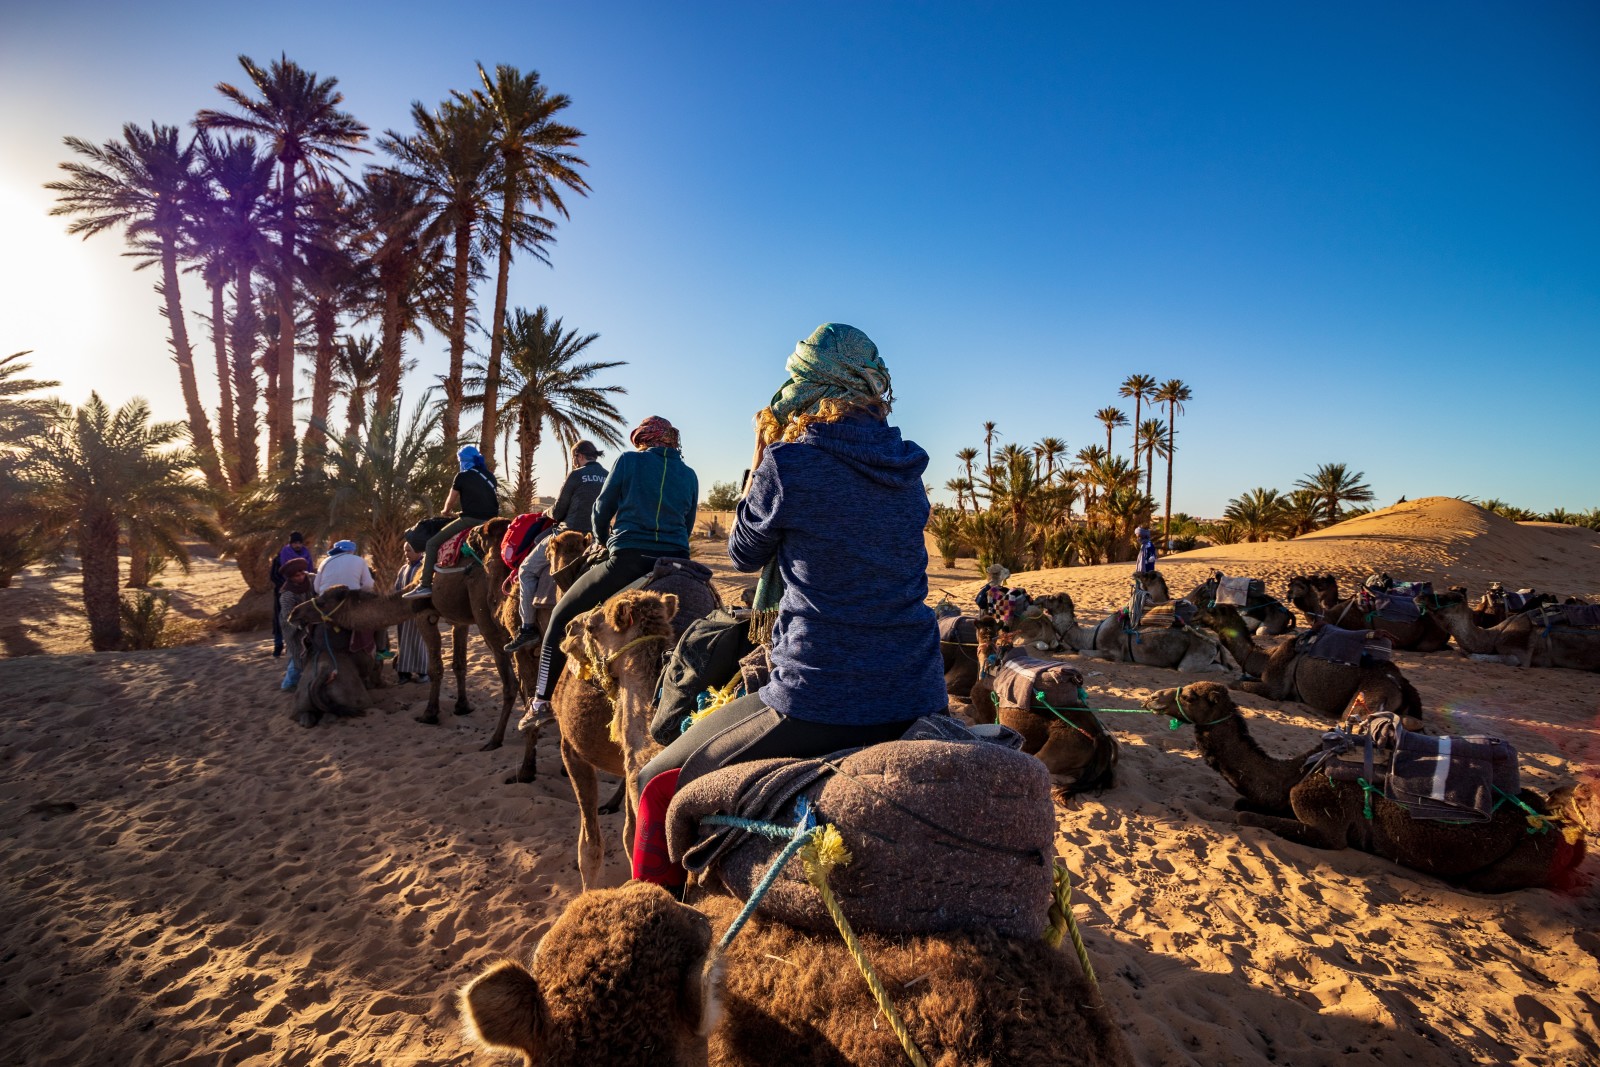 people riding camels next to palm trees during daytime